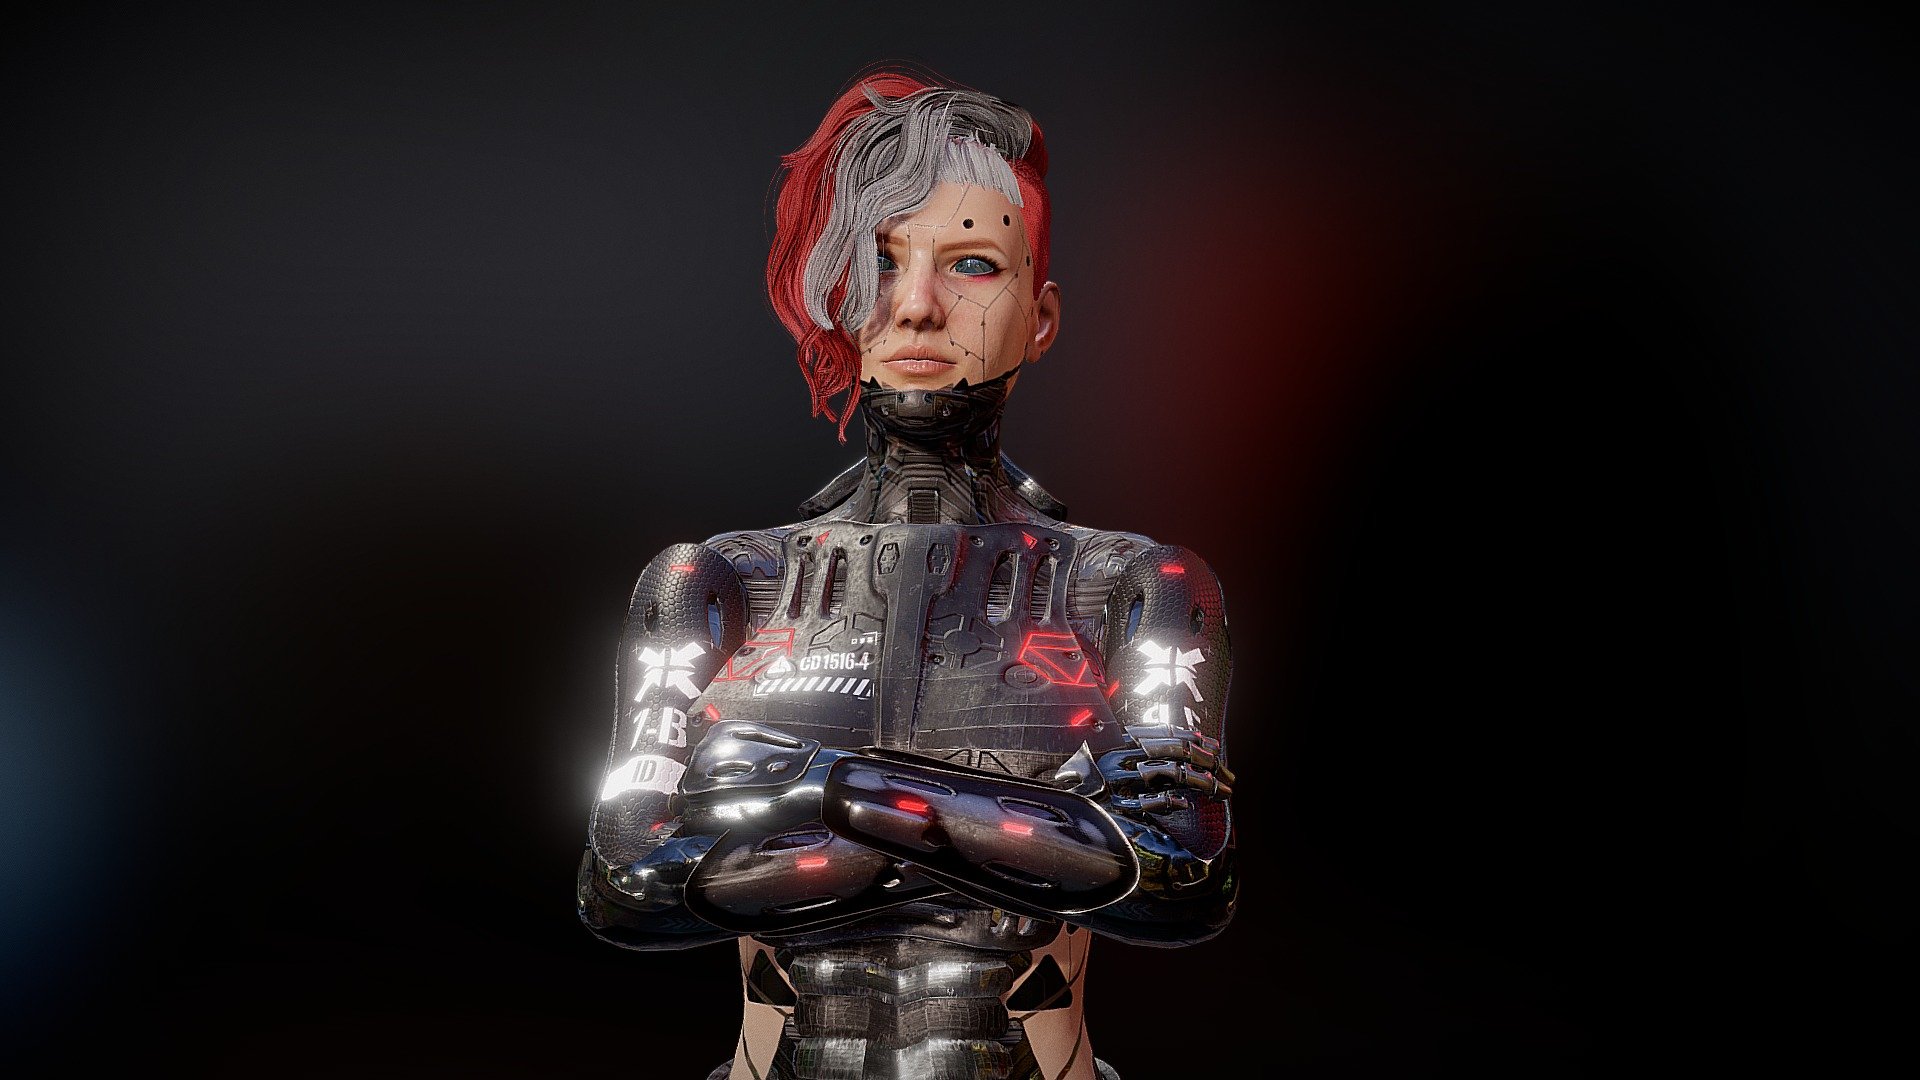 CYBERPUNK CHARACTER WOMAN BY OSCAR CREATIVO All rights reserved www.oscarcreativo.co
FULL PROYECT: https://www.artstation.com/artwork/rJmQZe

Attach additional file: BLENDER POSE T TEXTURES RIGGING
TEXTURES PBR 2K. 4K
RIGGING**





**If you need support write to my email creagraf@hotmail.com
** - CYBERPUNK CHARACTER  WOMAN BY Oscar Creativo - Buy Royalty Free 3D model by OSCAR CREATIVO (@oscar_creativo) 3d model